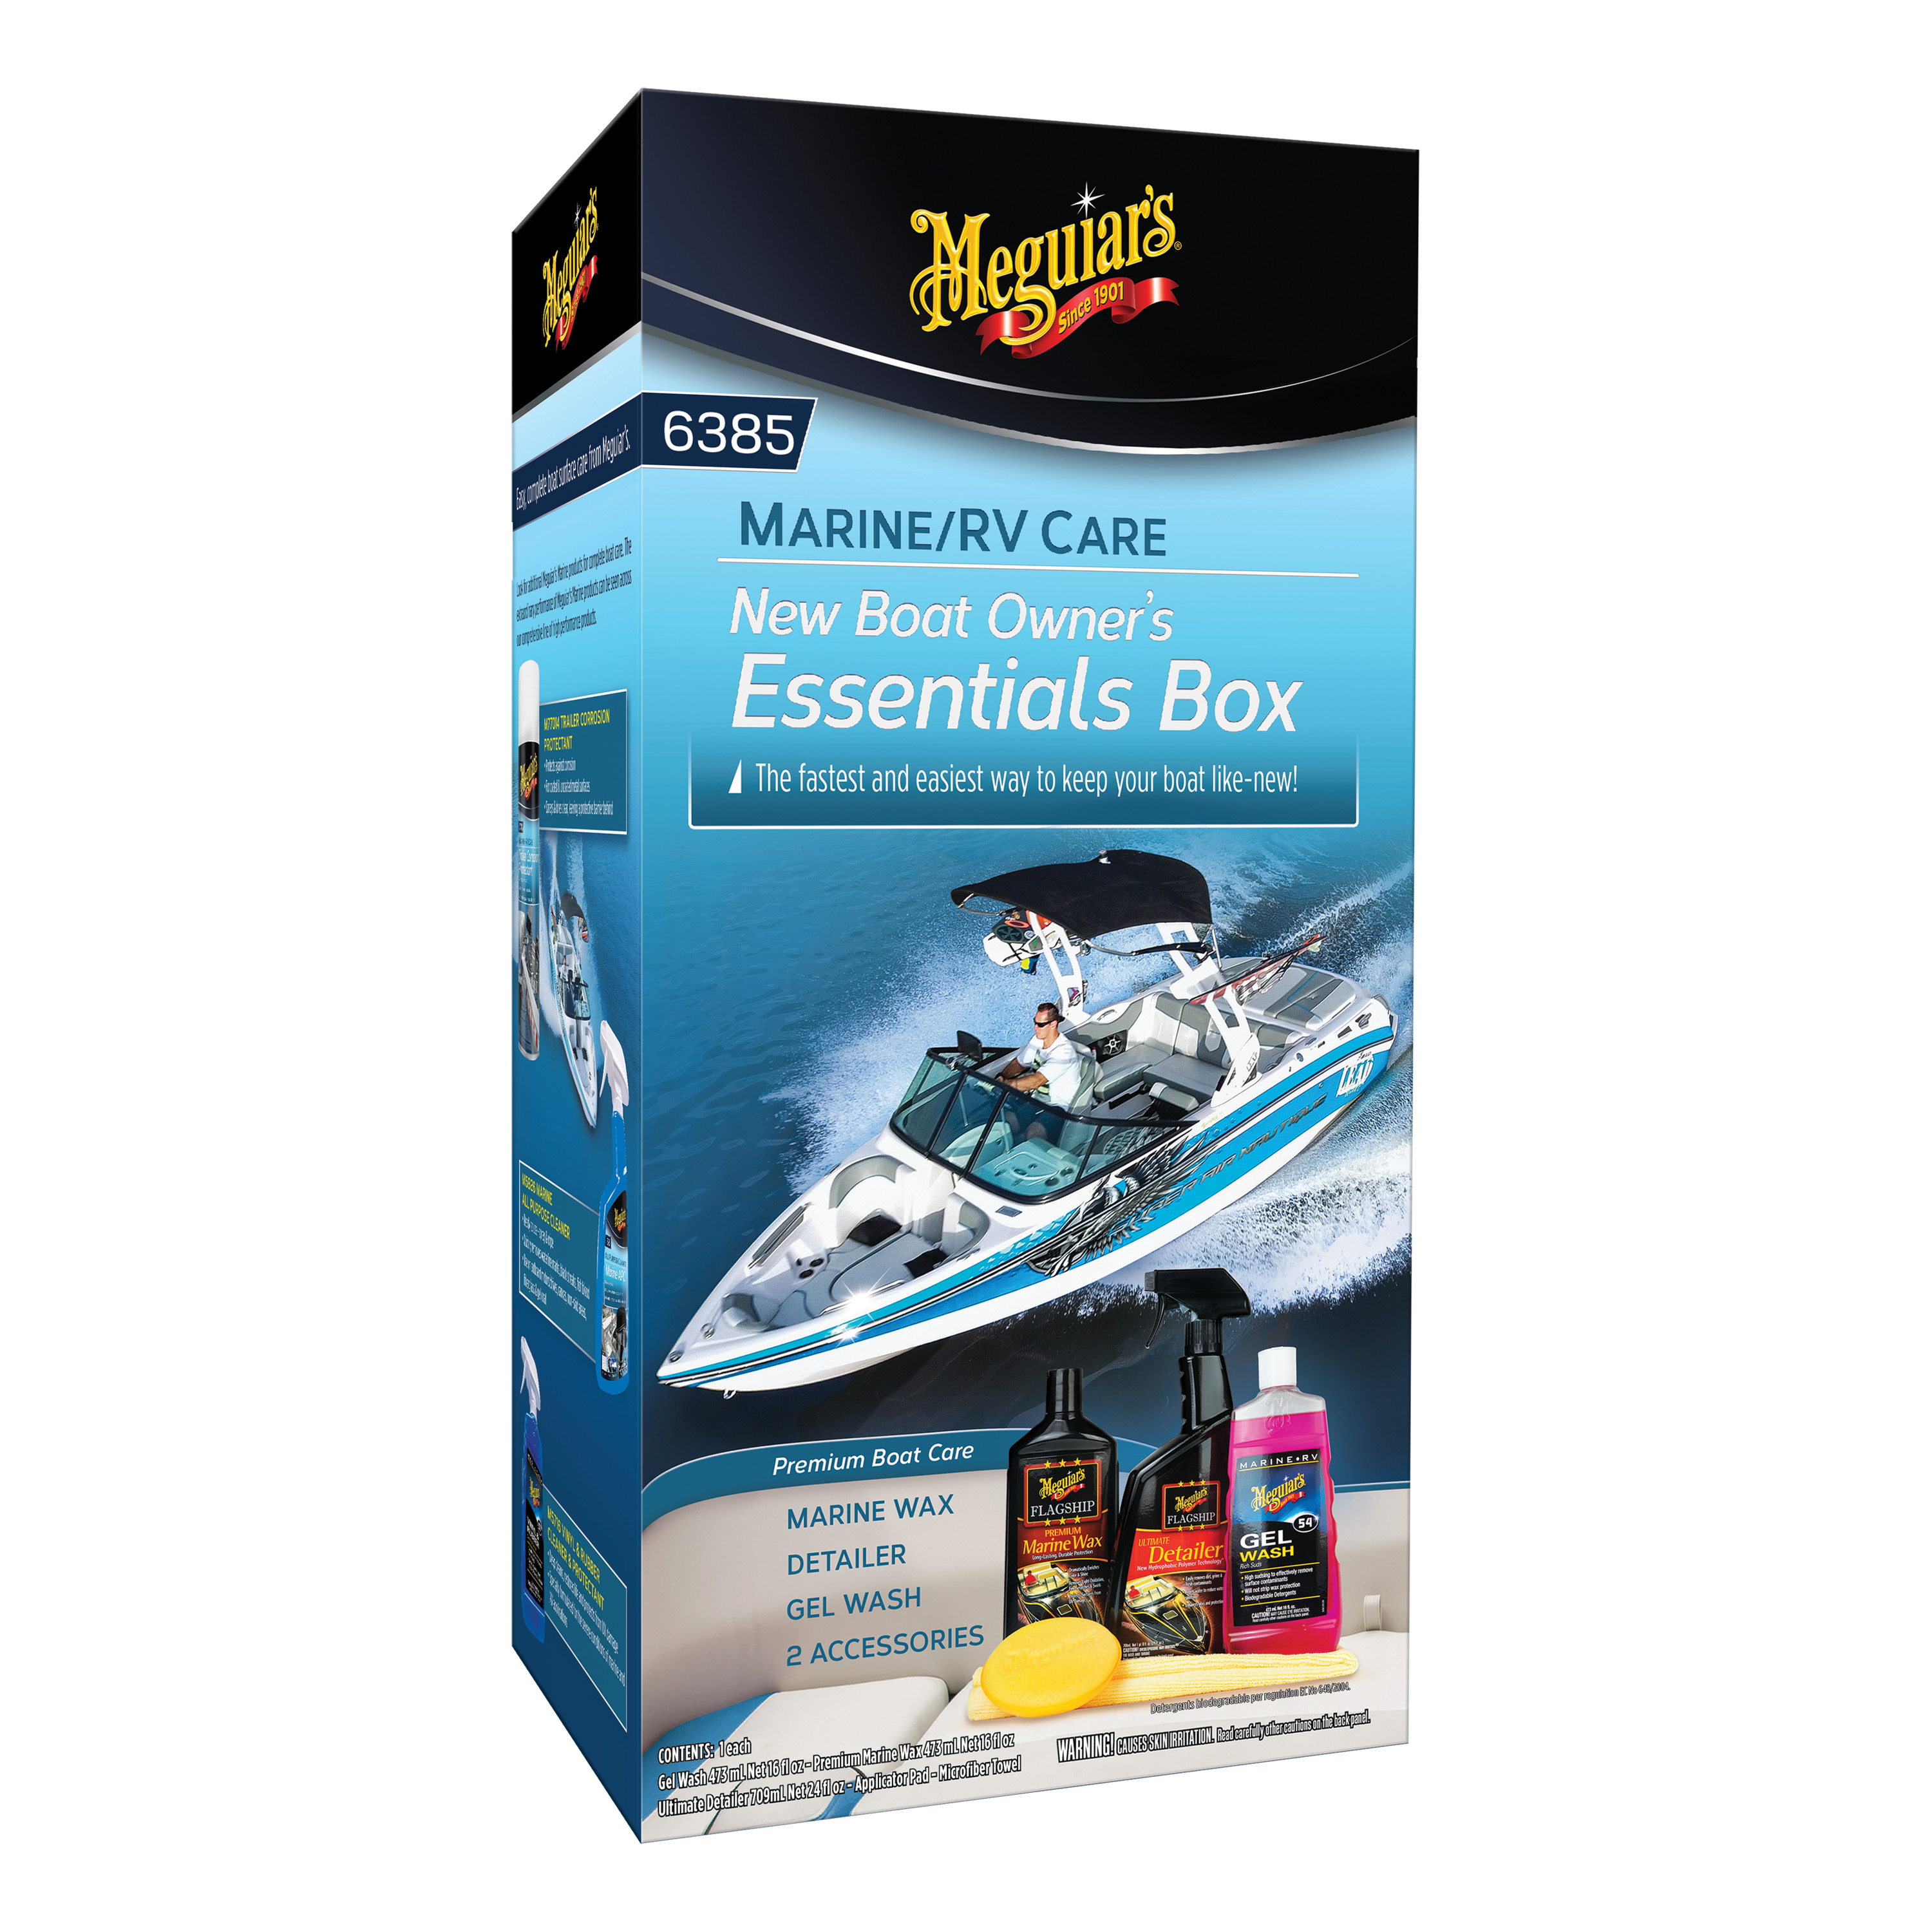 Meguiar’s M6385 Marine/RV Care New Boat Owner’s Essentials Box Kit, 1 Pack - image 1 of 9